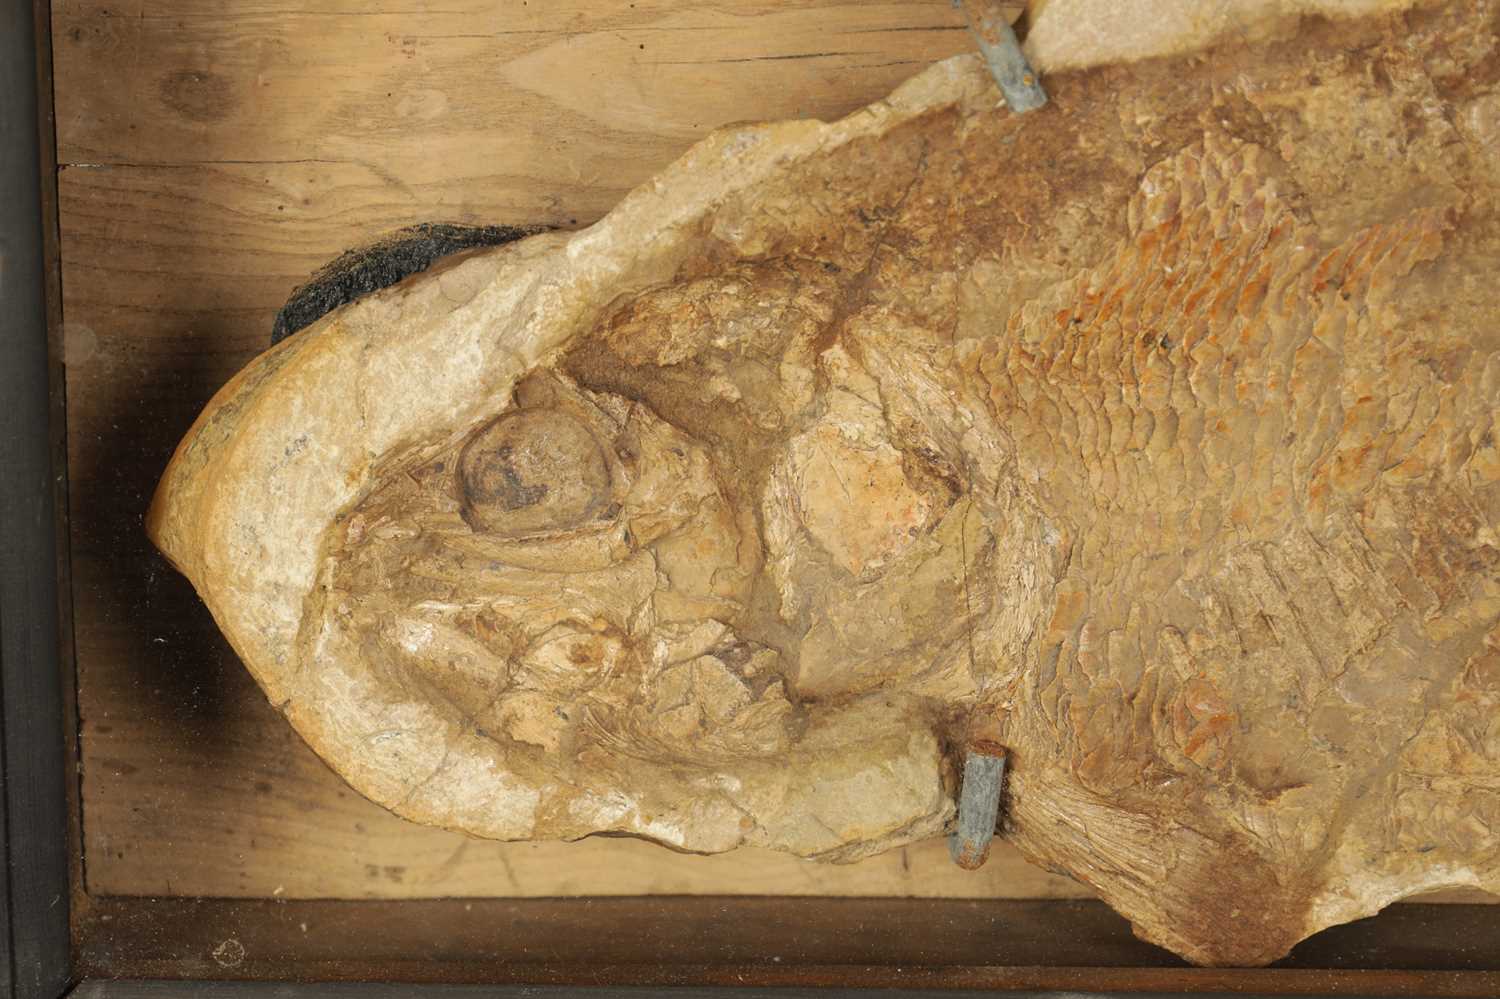 A LARGE FOSSIL OF THE EXTICT BRANNERION FISH WHICH LIVED IN THE EARLY CRETACEOUS PERIOD - Image 3 of 6